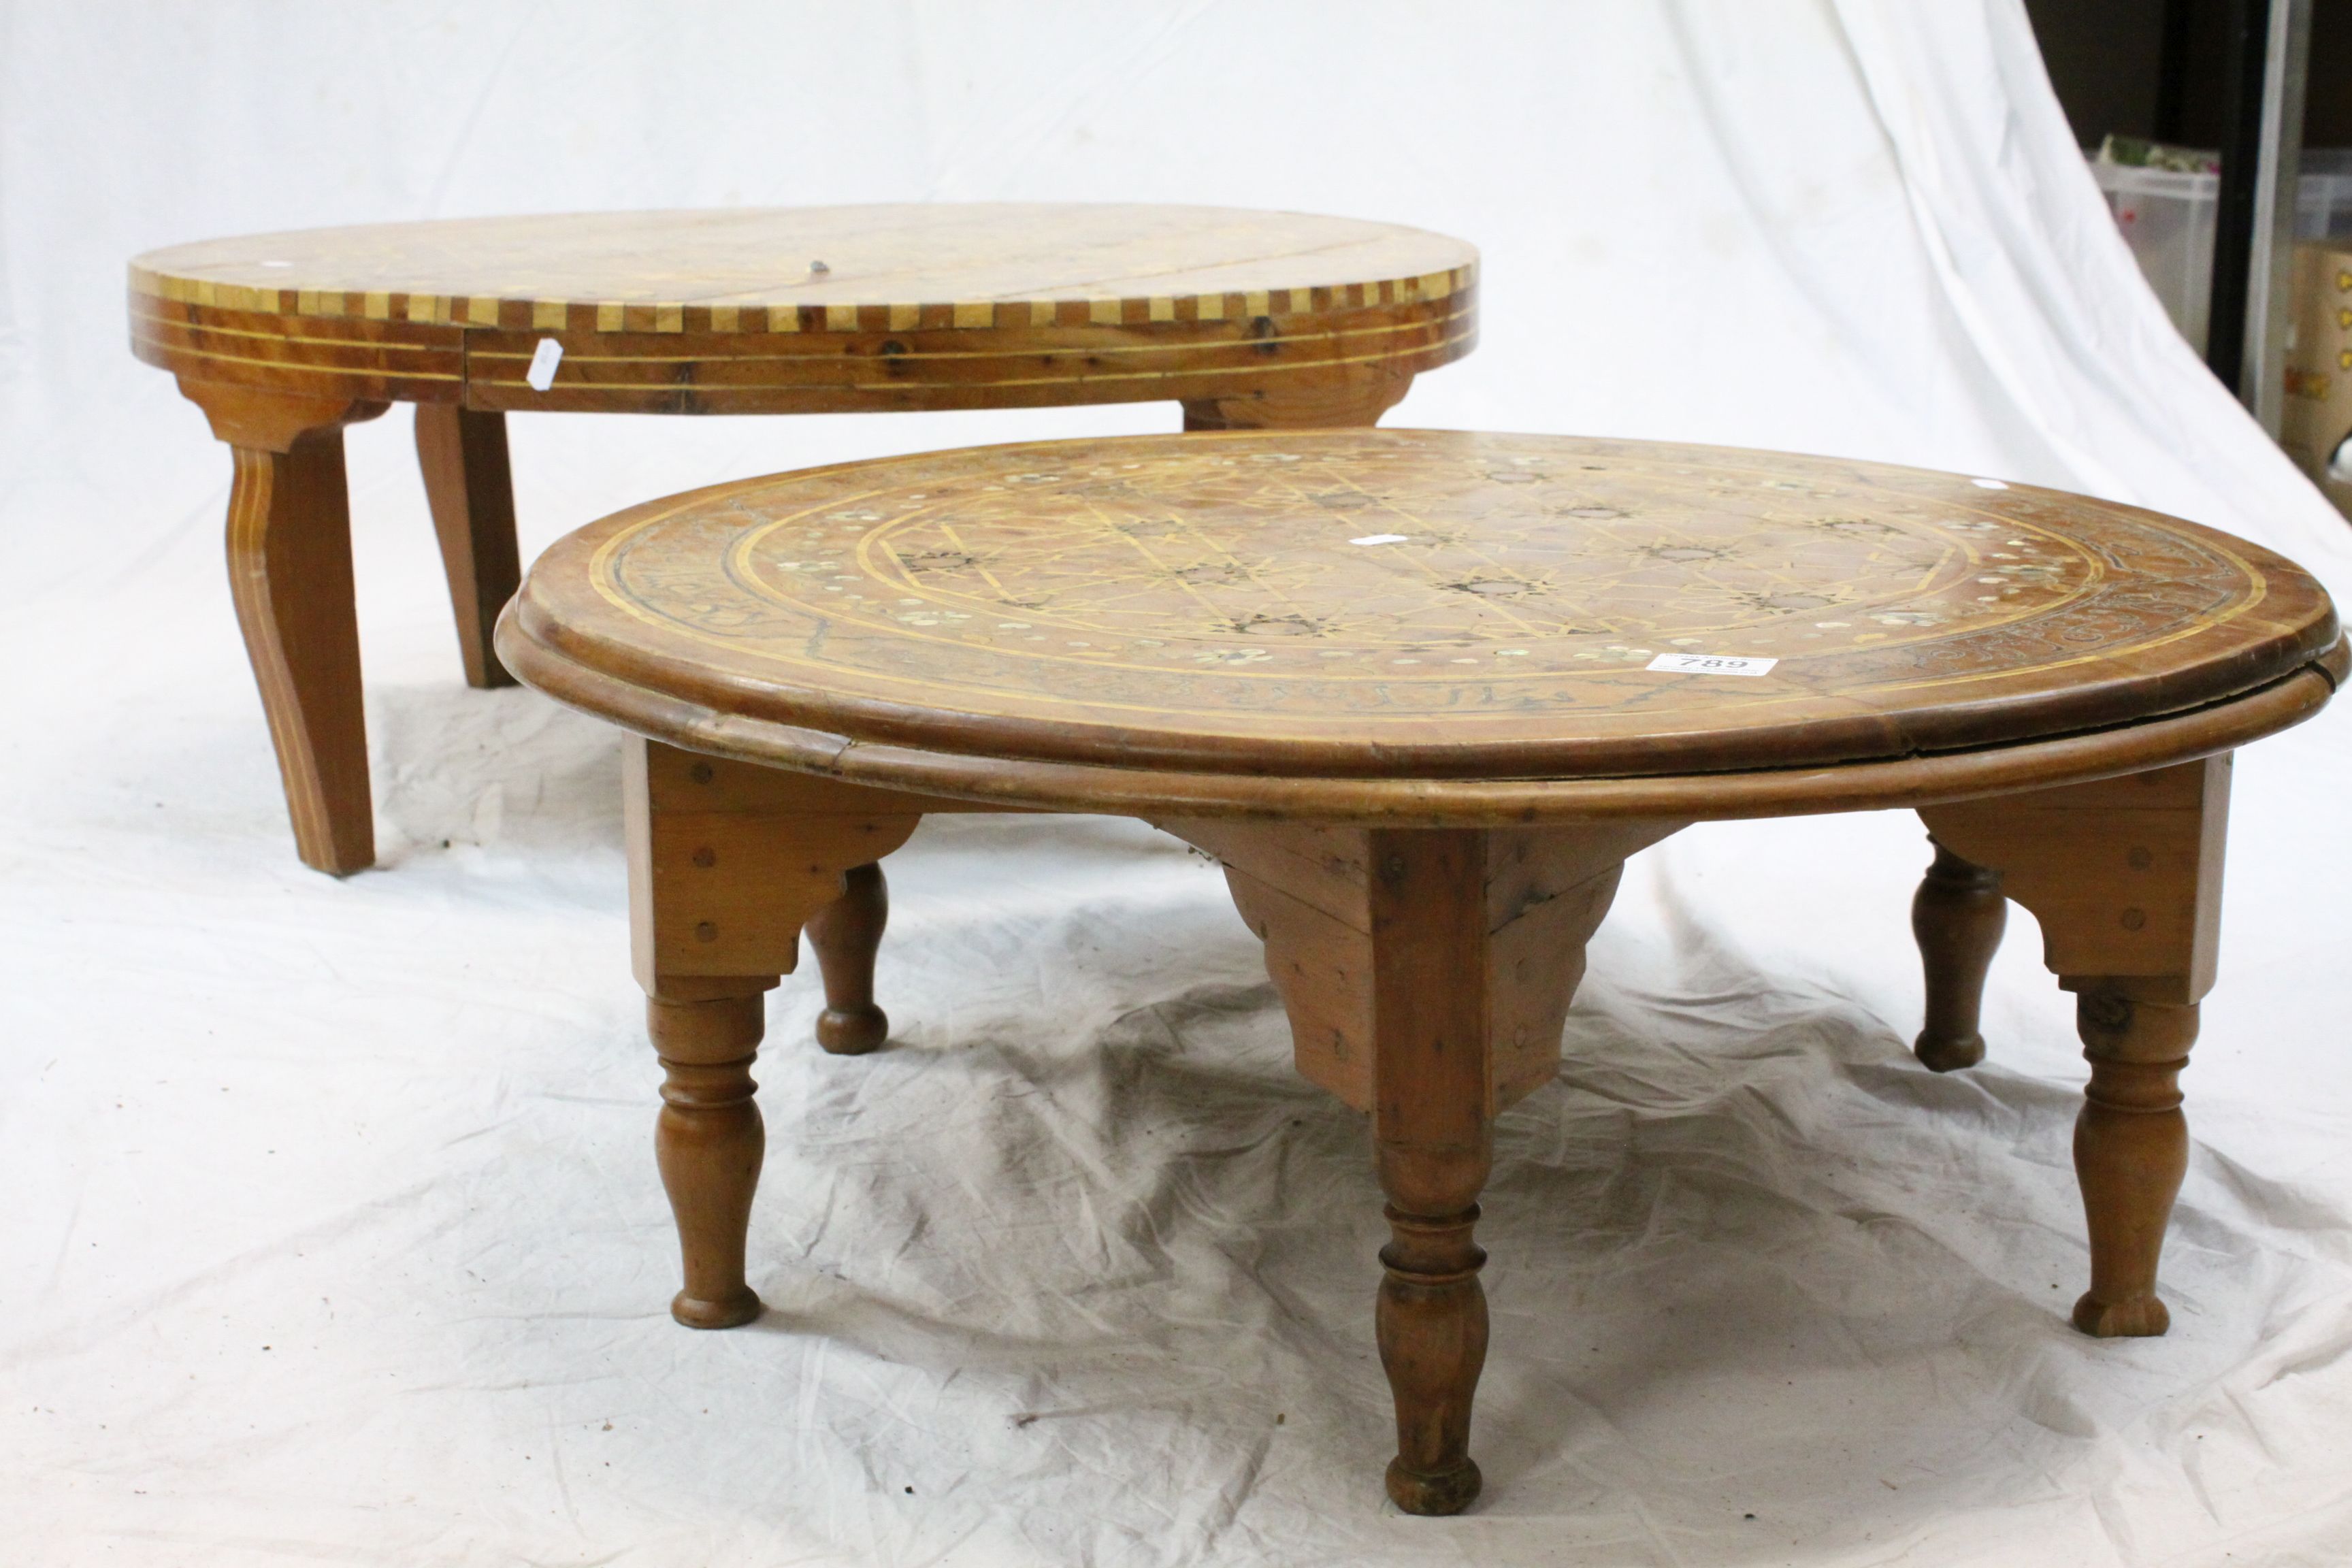 Two Middle Eastern Mother of Pearl Inlaid Circular Coffee Tables, 71cms diameter and 82cms diameter - Image 4 of 4